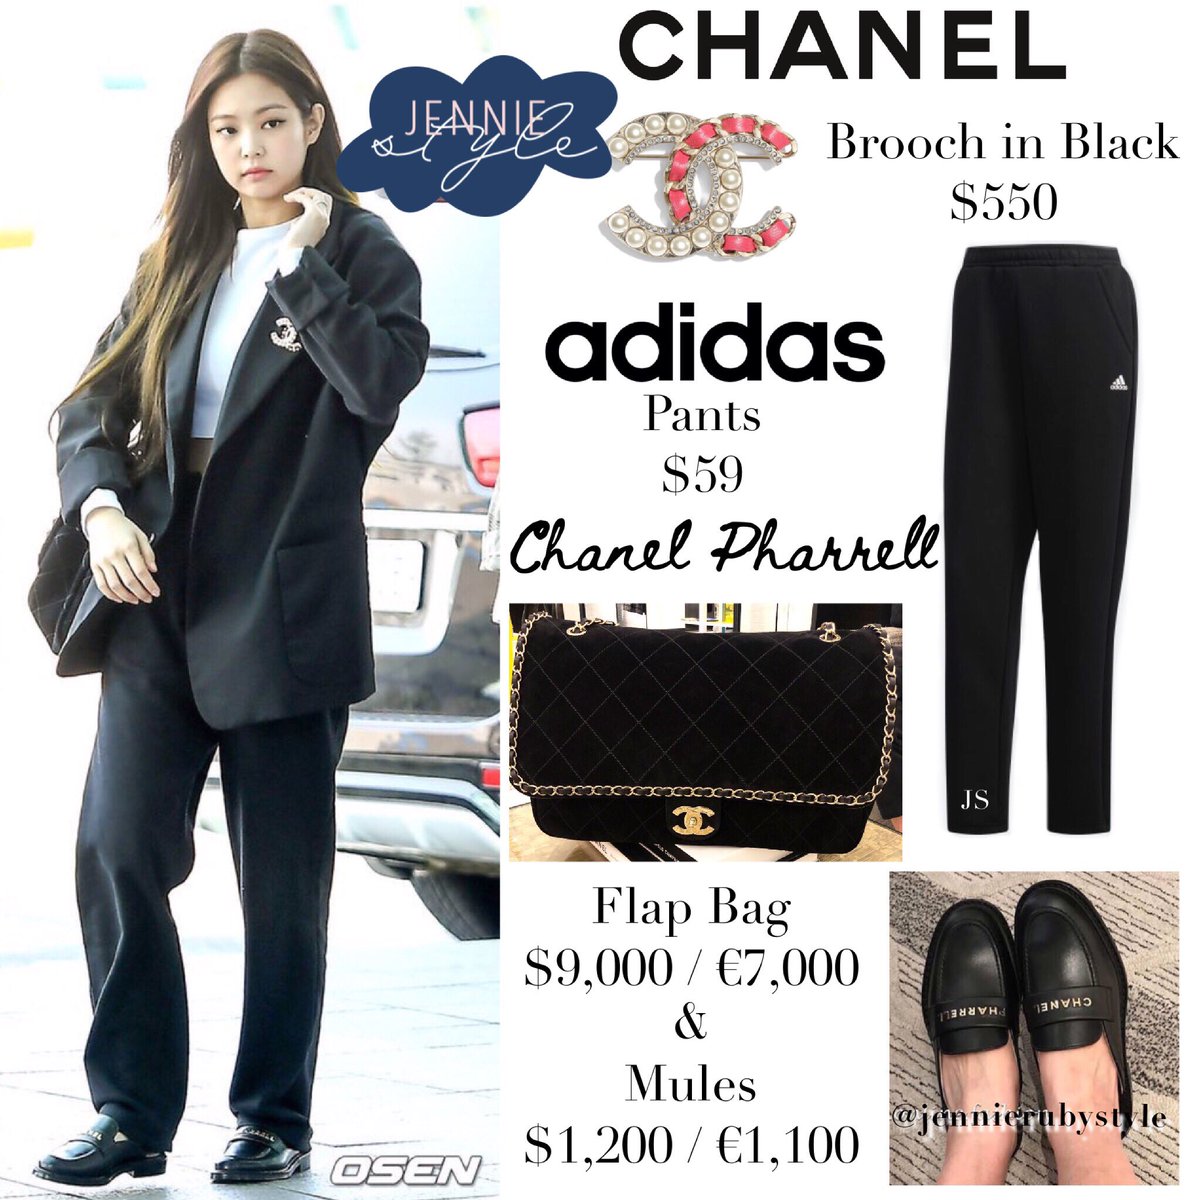 Jennie Style on X: Incheon Airport 190411 #CHANEL Brooch (in black) $550,  ADIDAS Pants $59 #CHANELPHARRELL Capsule Collection Flap Bag $9,000 /  €7,000 & Mules $1,200 / €1,100 #jennie #jenniekim #blackpink # blackpinkfashion #blackpinkstyle